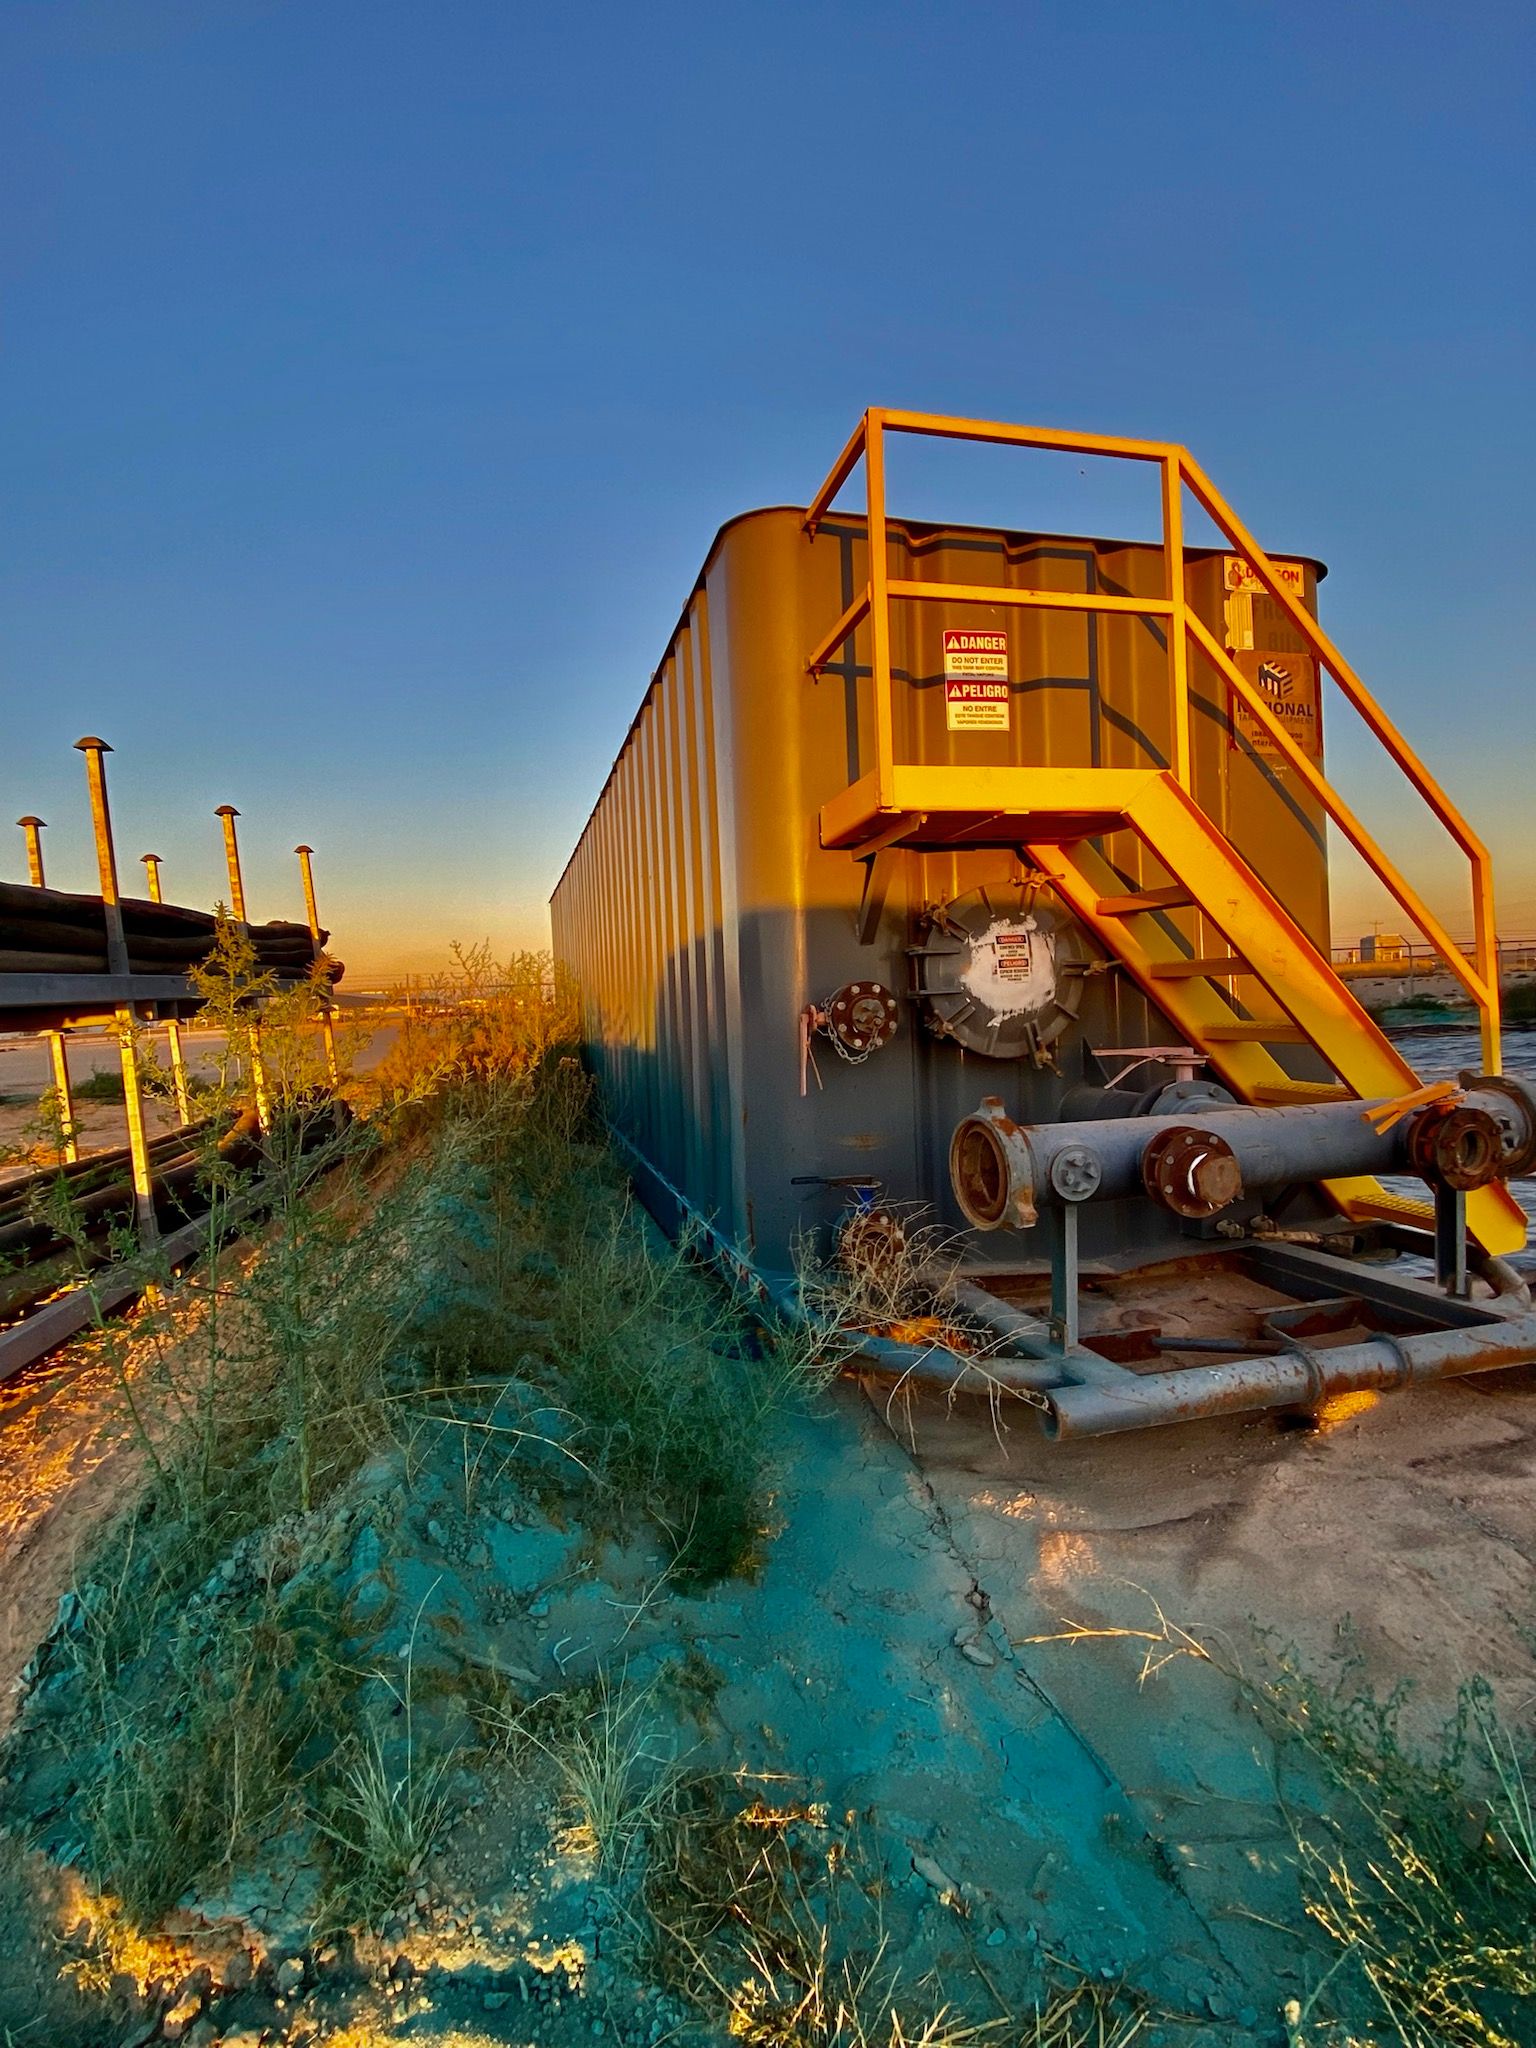 Right-of-Way Vegetation Management
We service 
Oil field
Industrial sites

We provide attention to detail for our chemical remediation service for oil fields and industrial sites. for Maverick Weed & Pest Control in All of Texas, TX